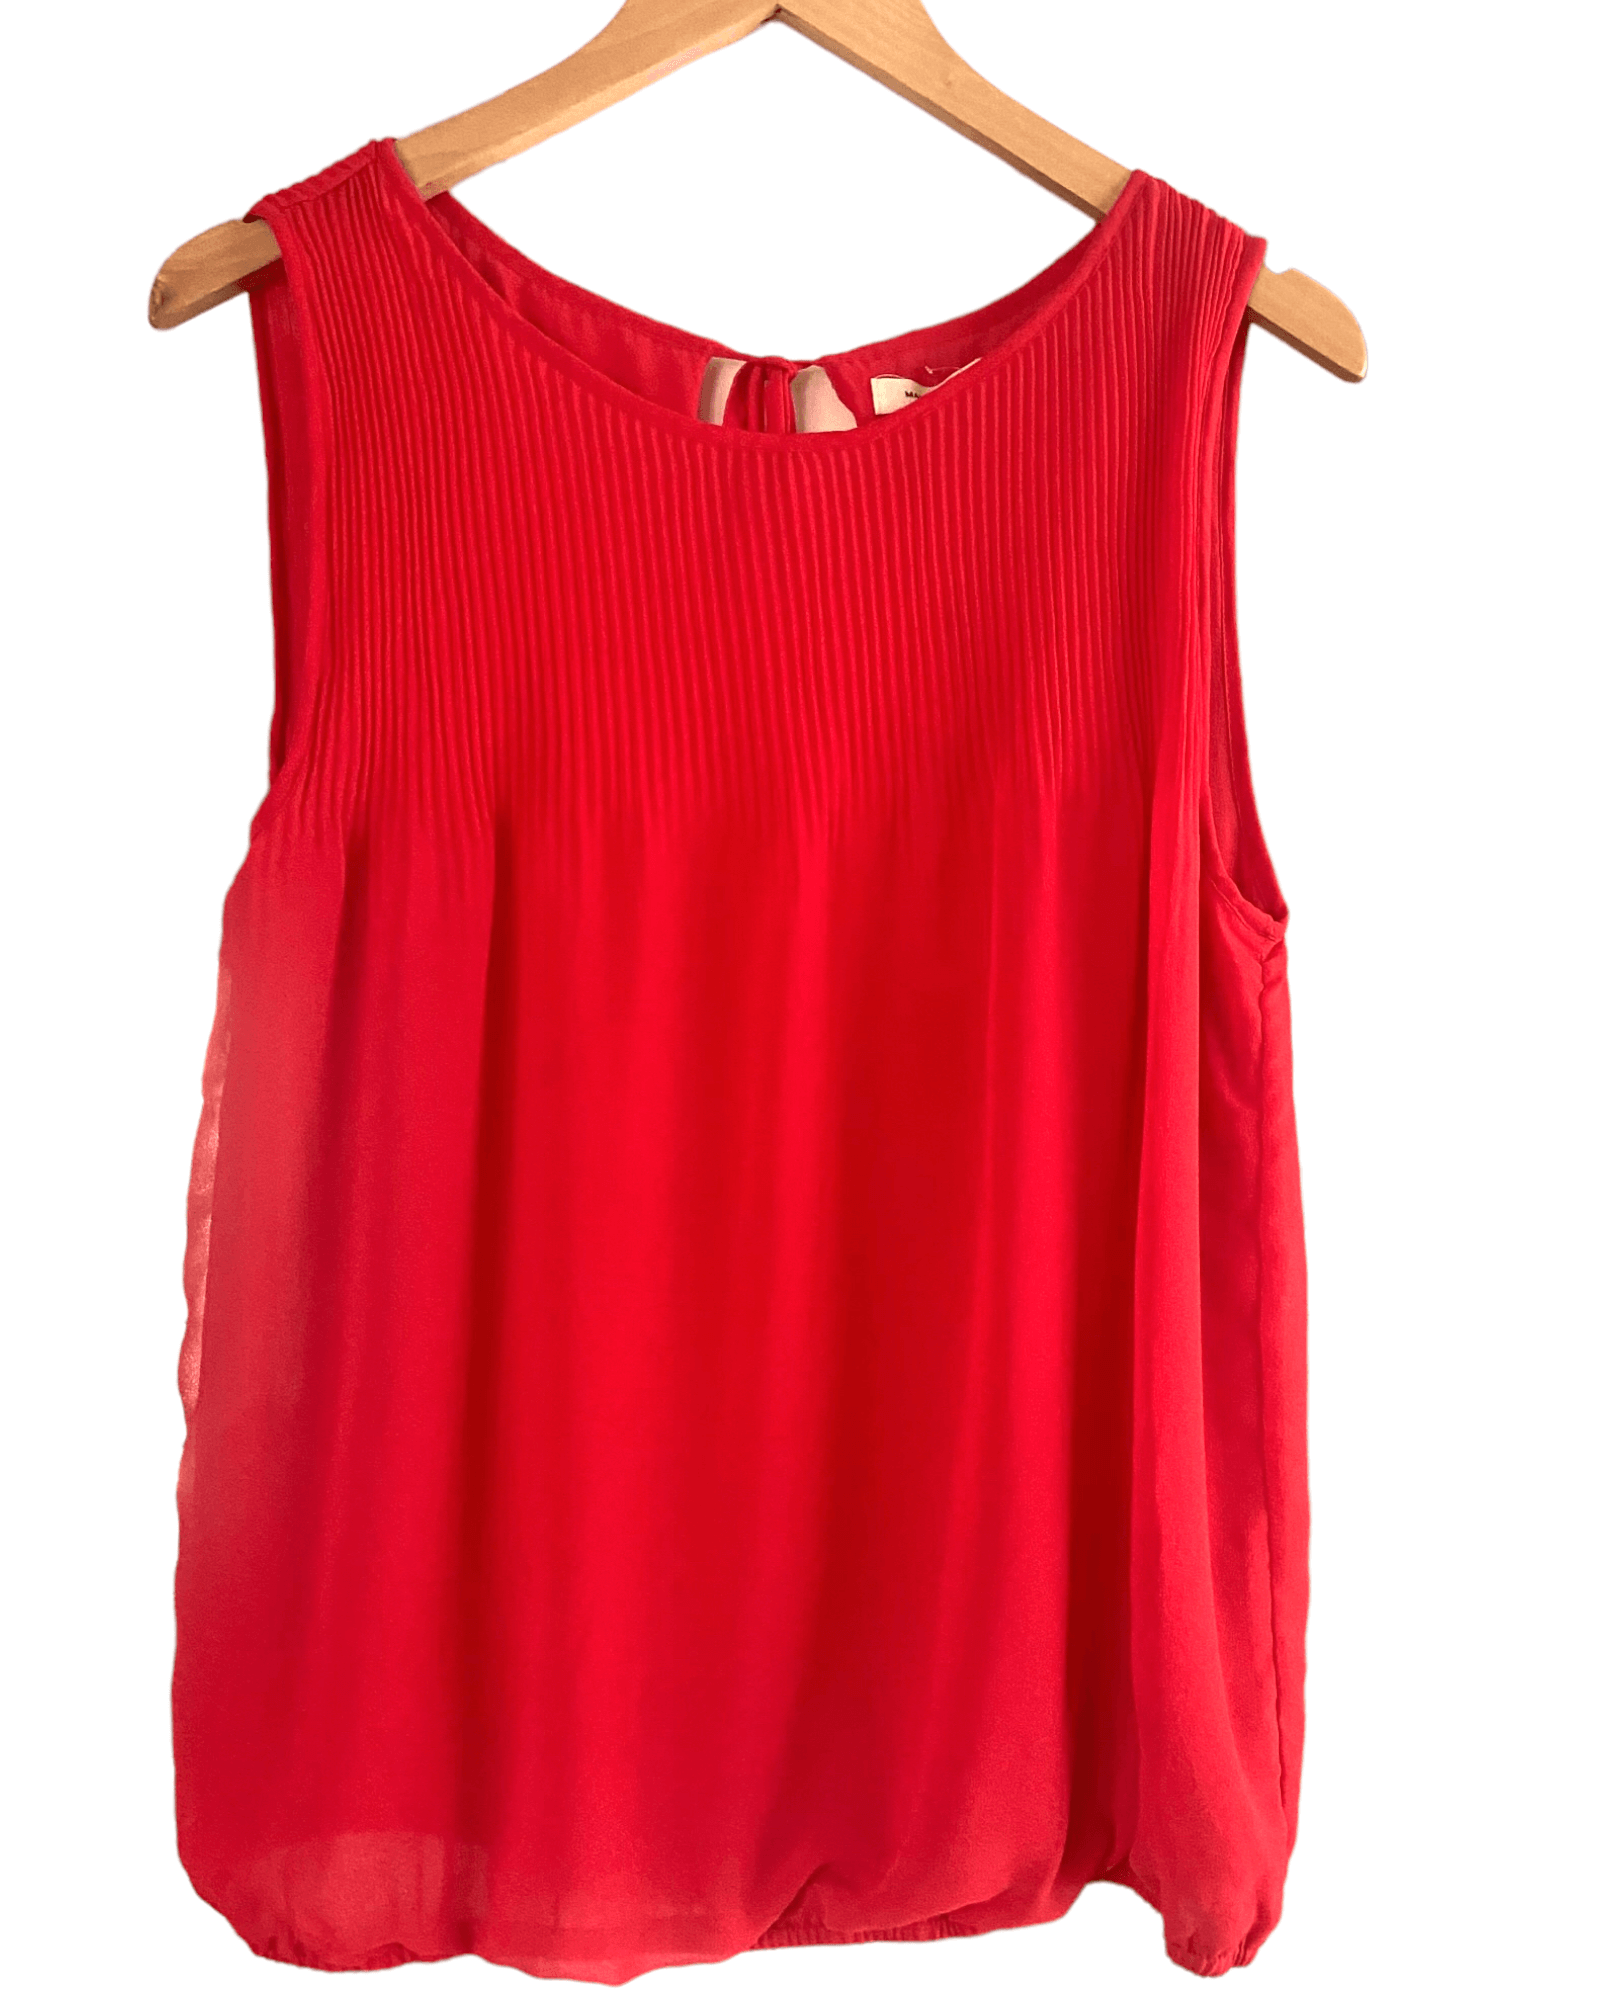 Warm Spring MAX STUDIO persimmon red sleeveless pleated top